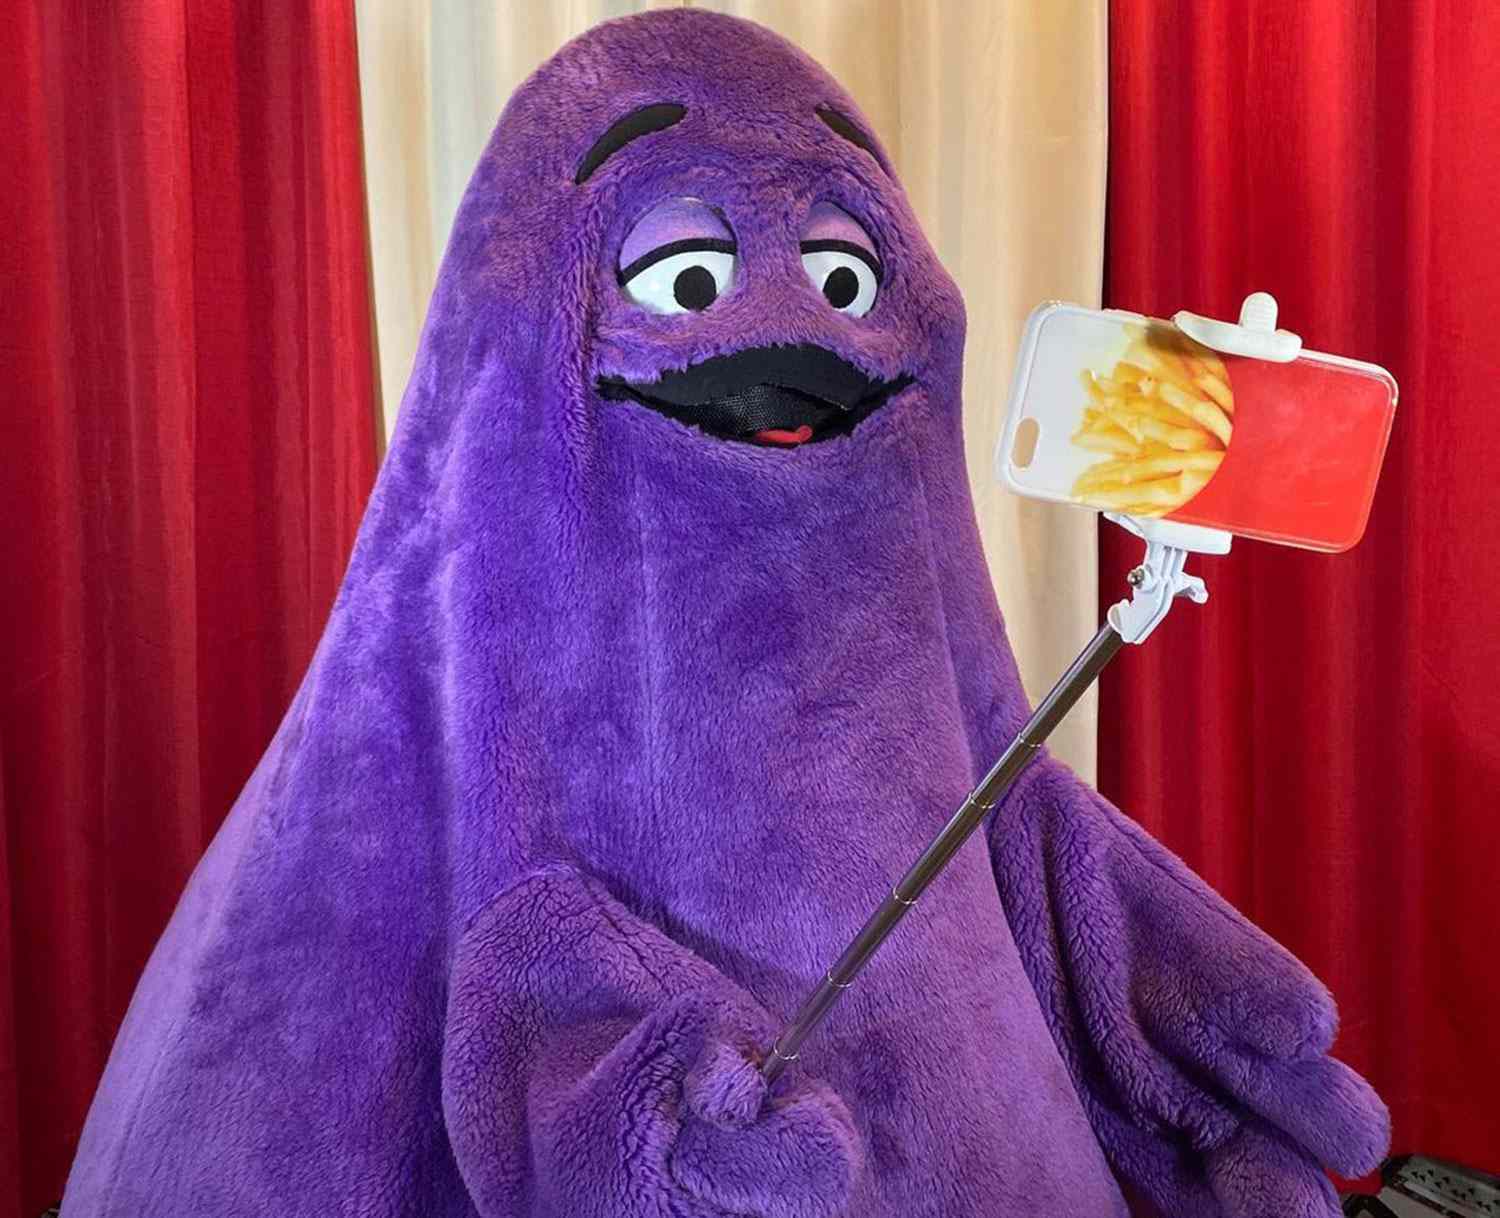 Grimace: Unveiling the Meaning Behind the Facial Expression